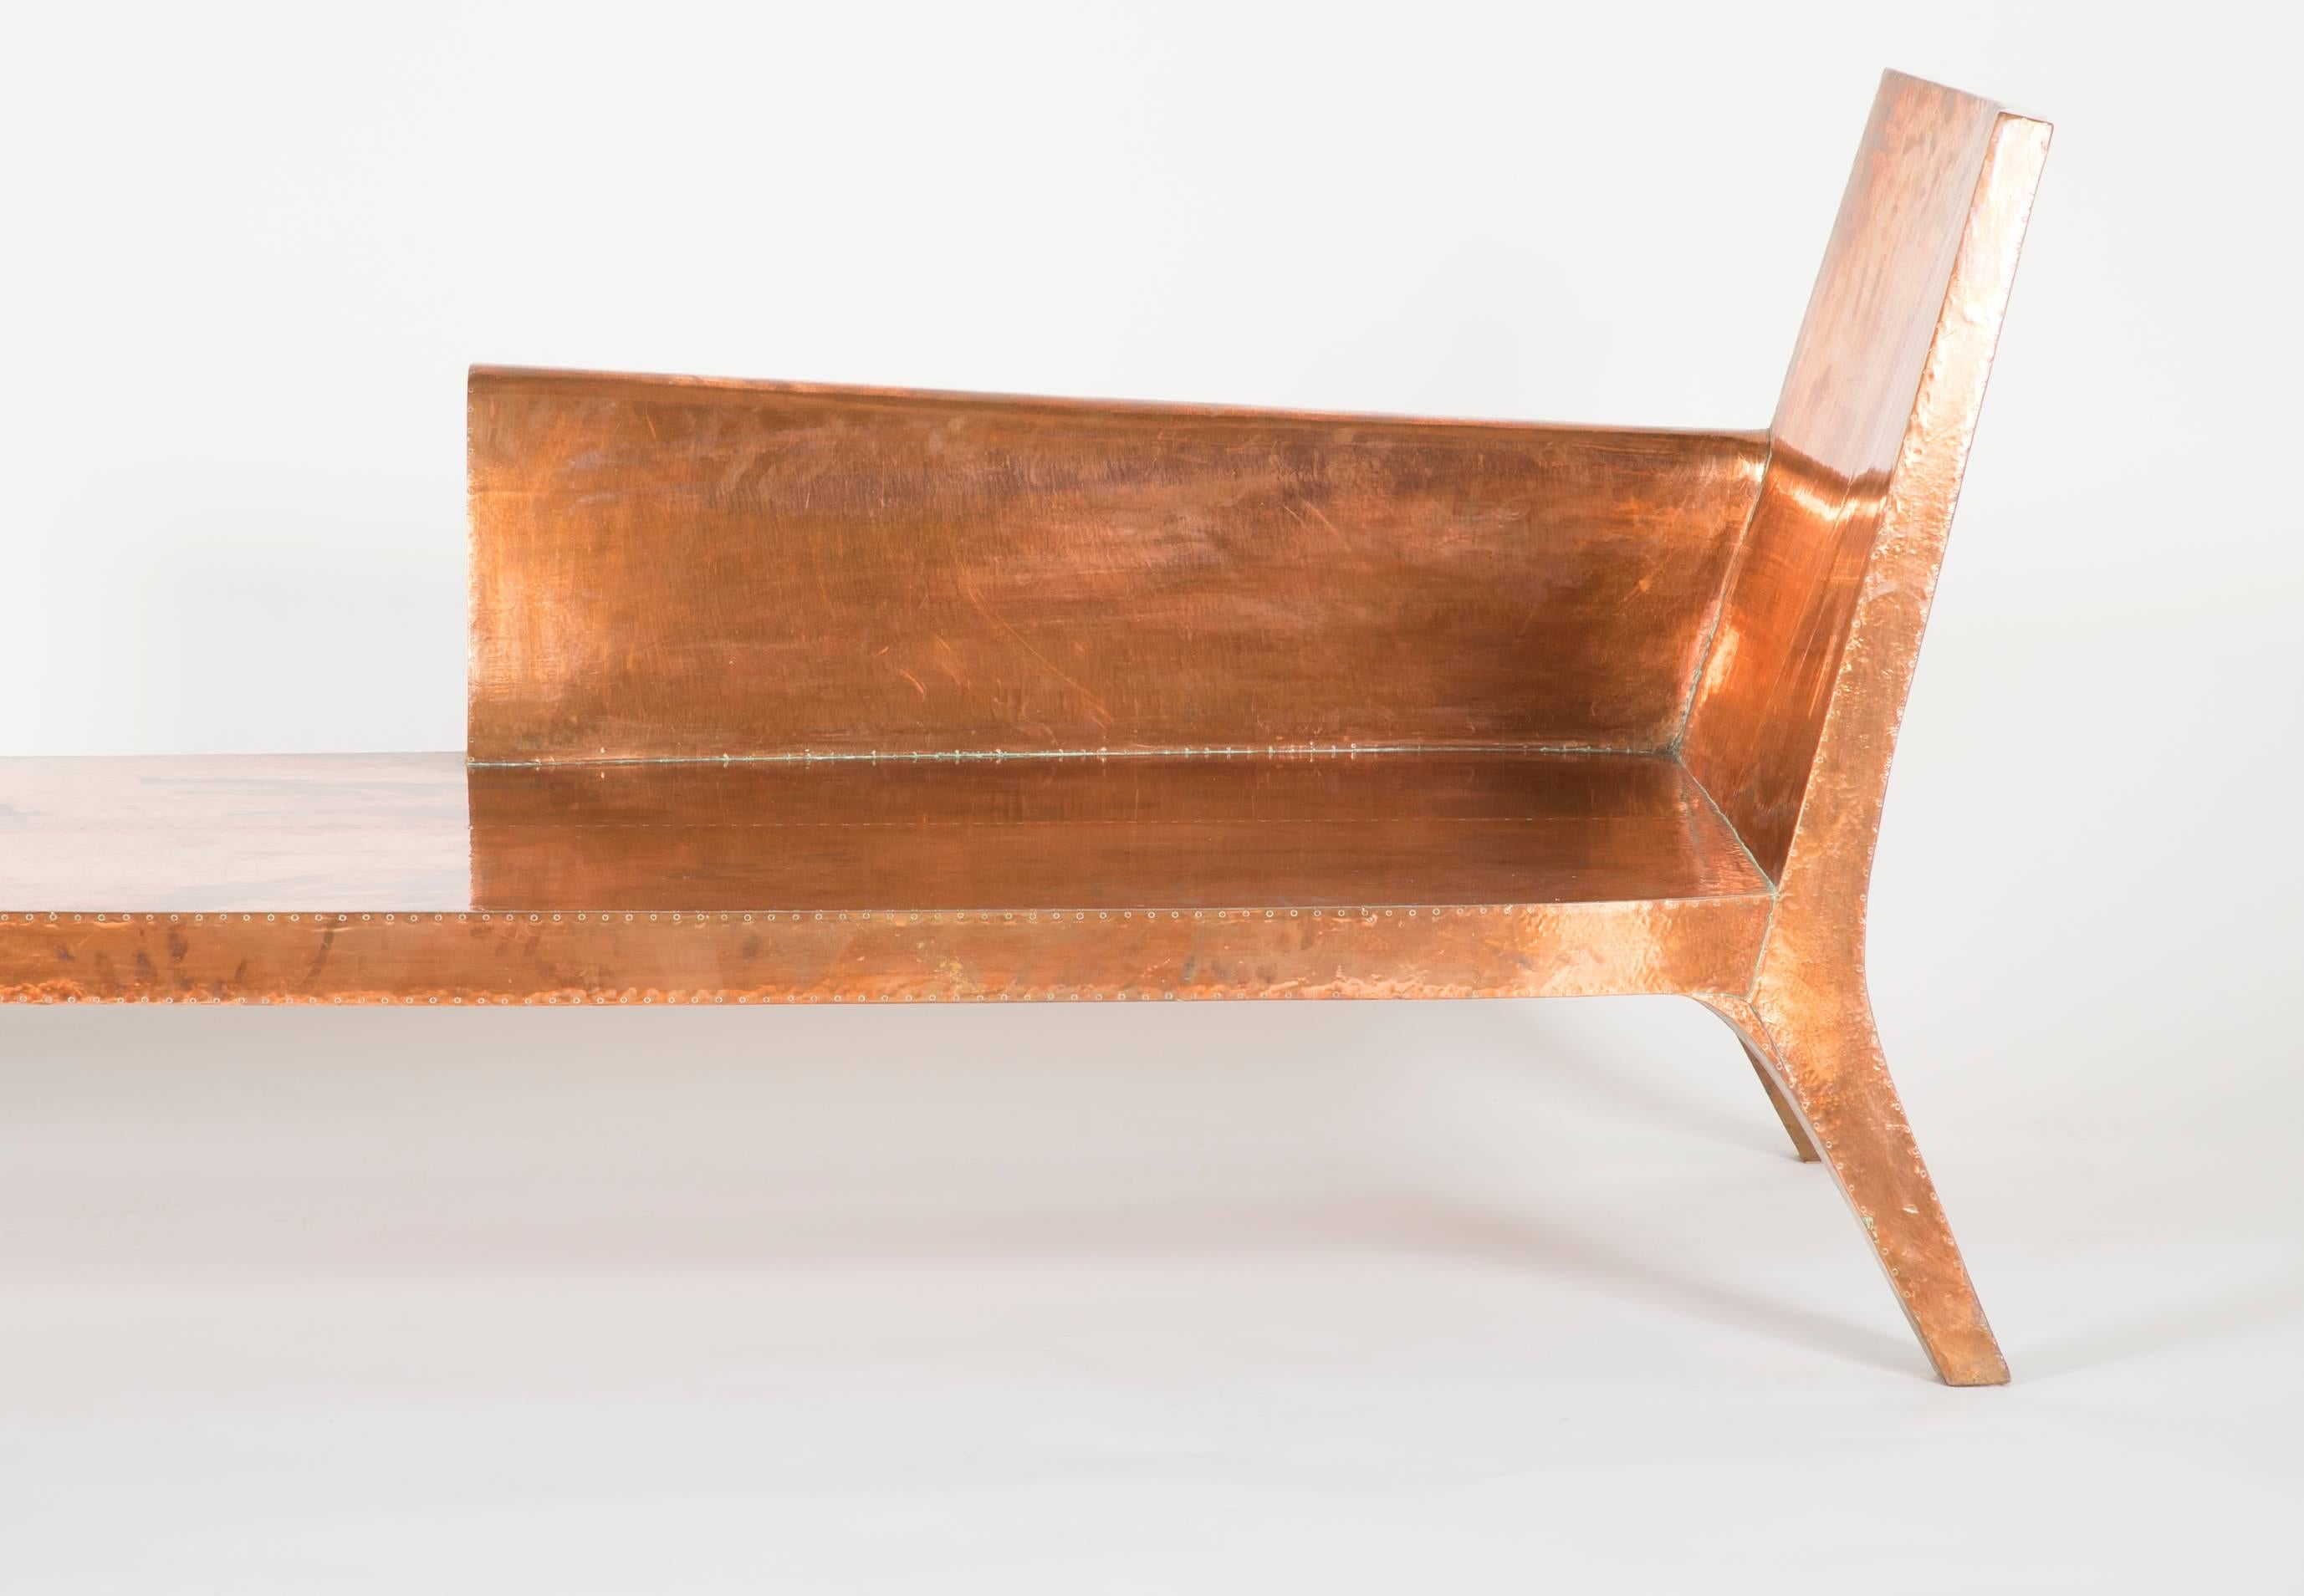 Contemporary Copper Clad Chaise Designed by Paul Mathieu for Stephanie Odegard Co. Ltd. 